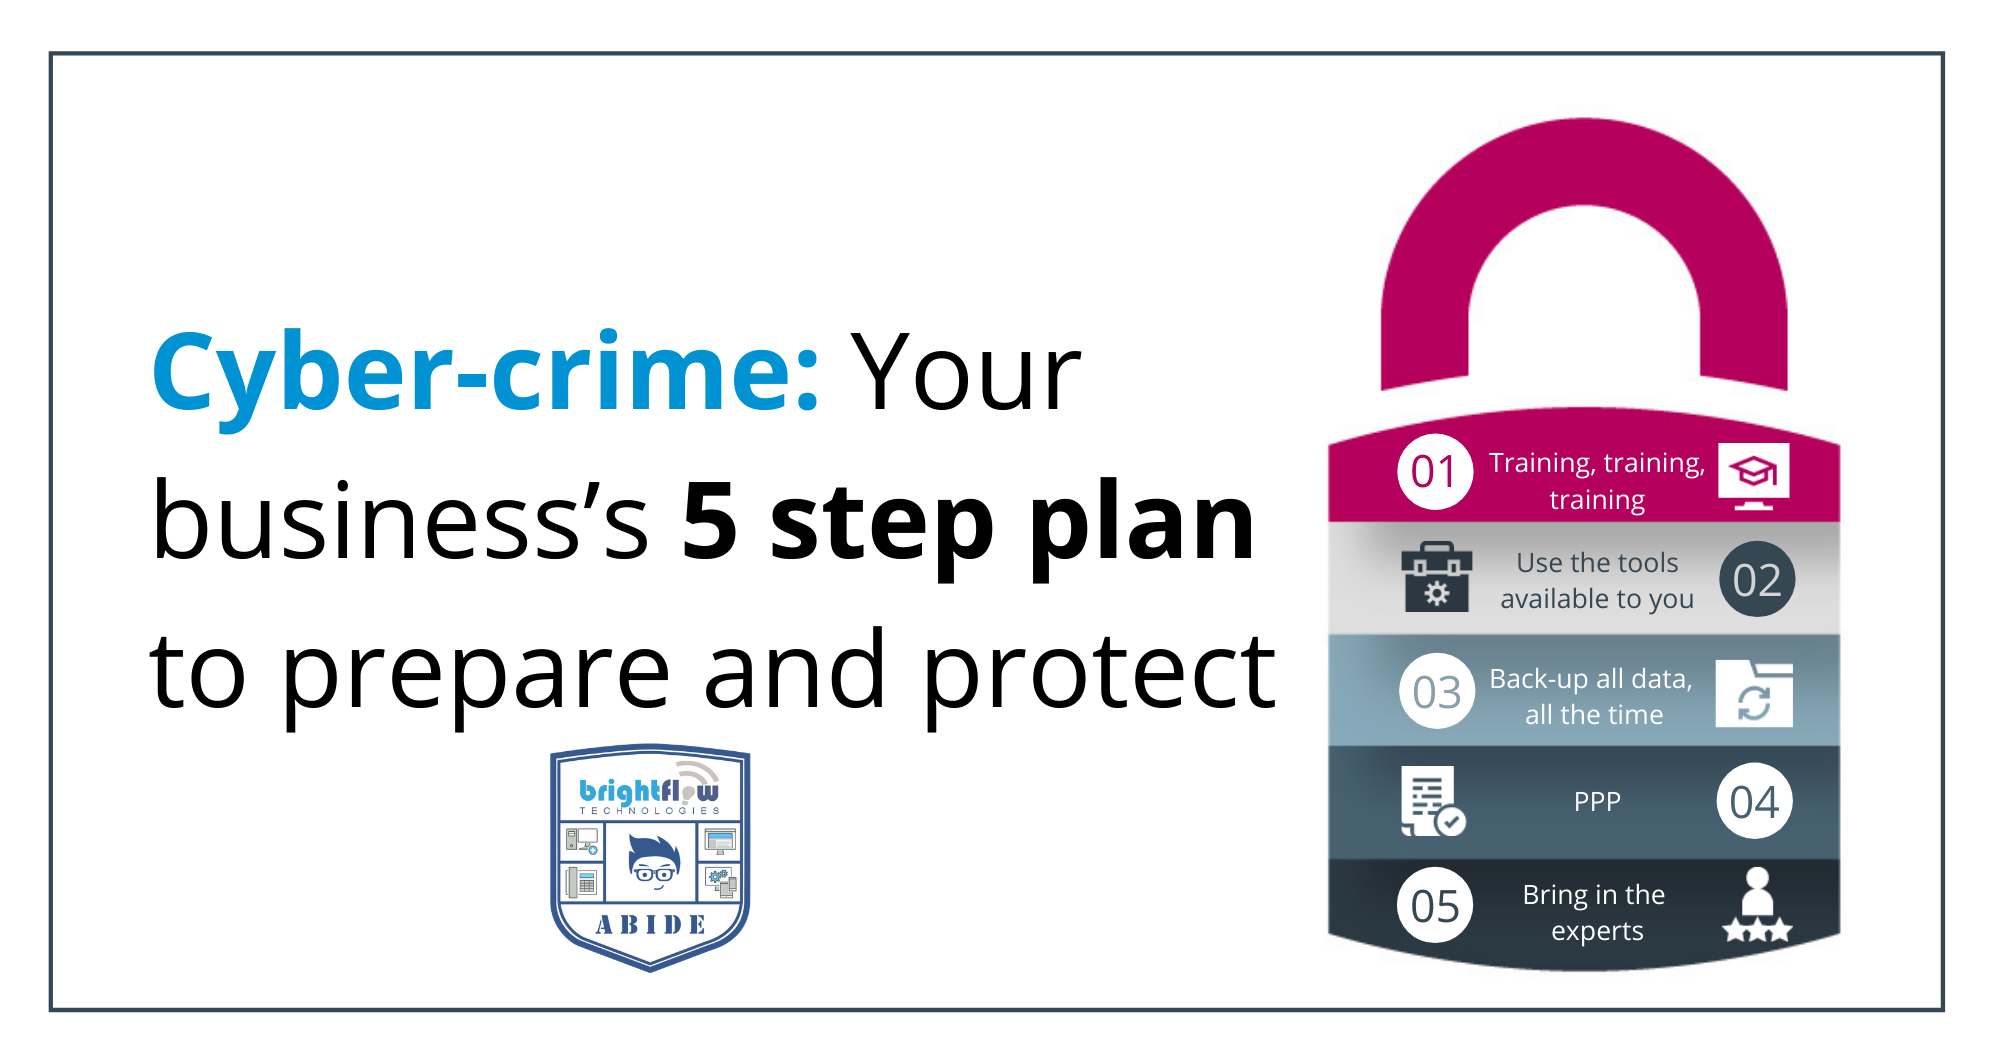 Your 5 step plan to prepare and protect your business from Cyber-crime